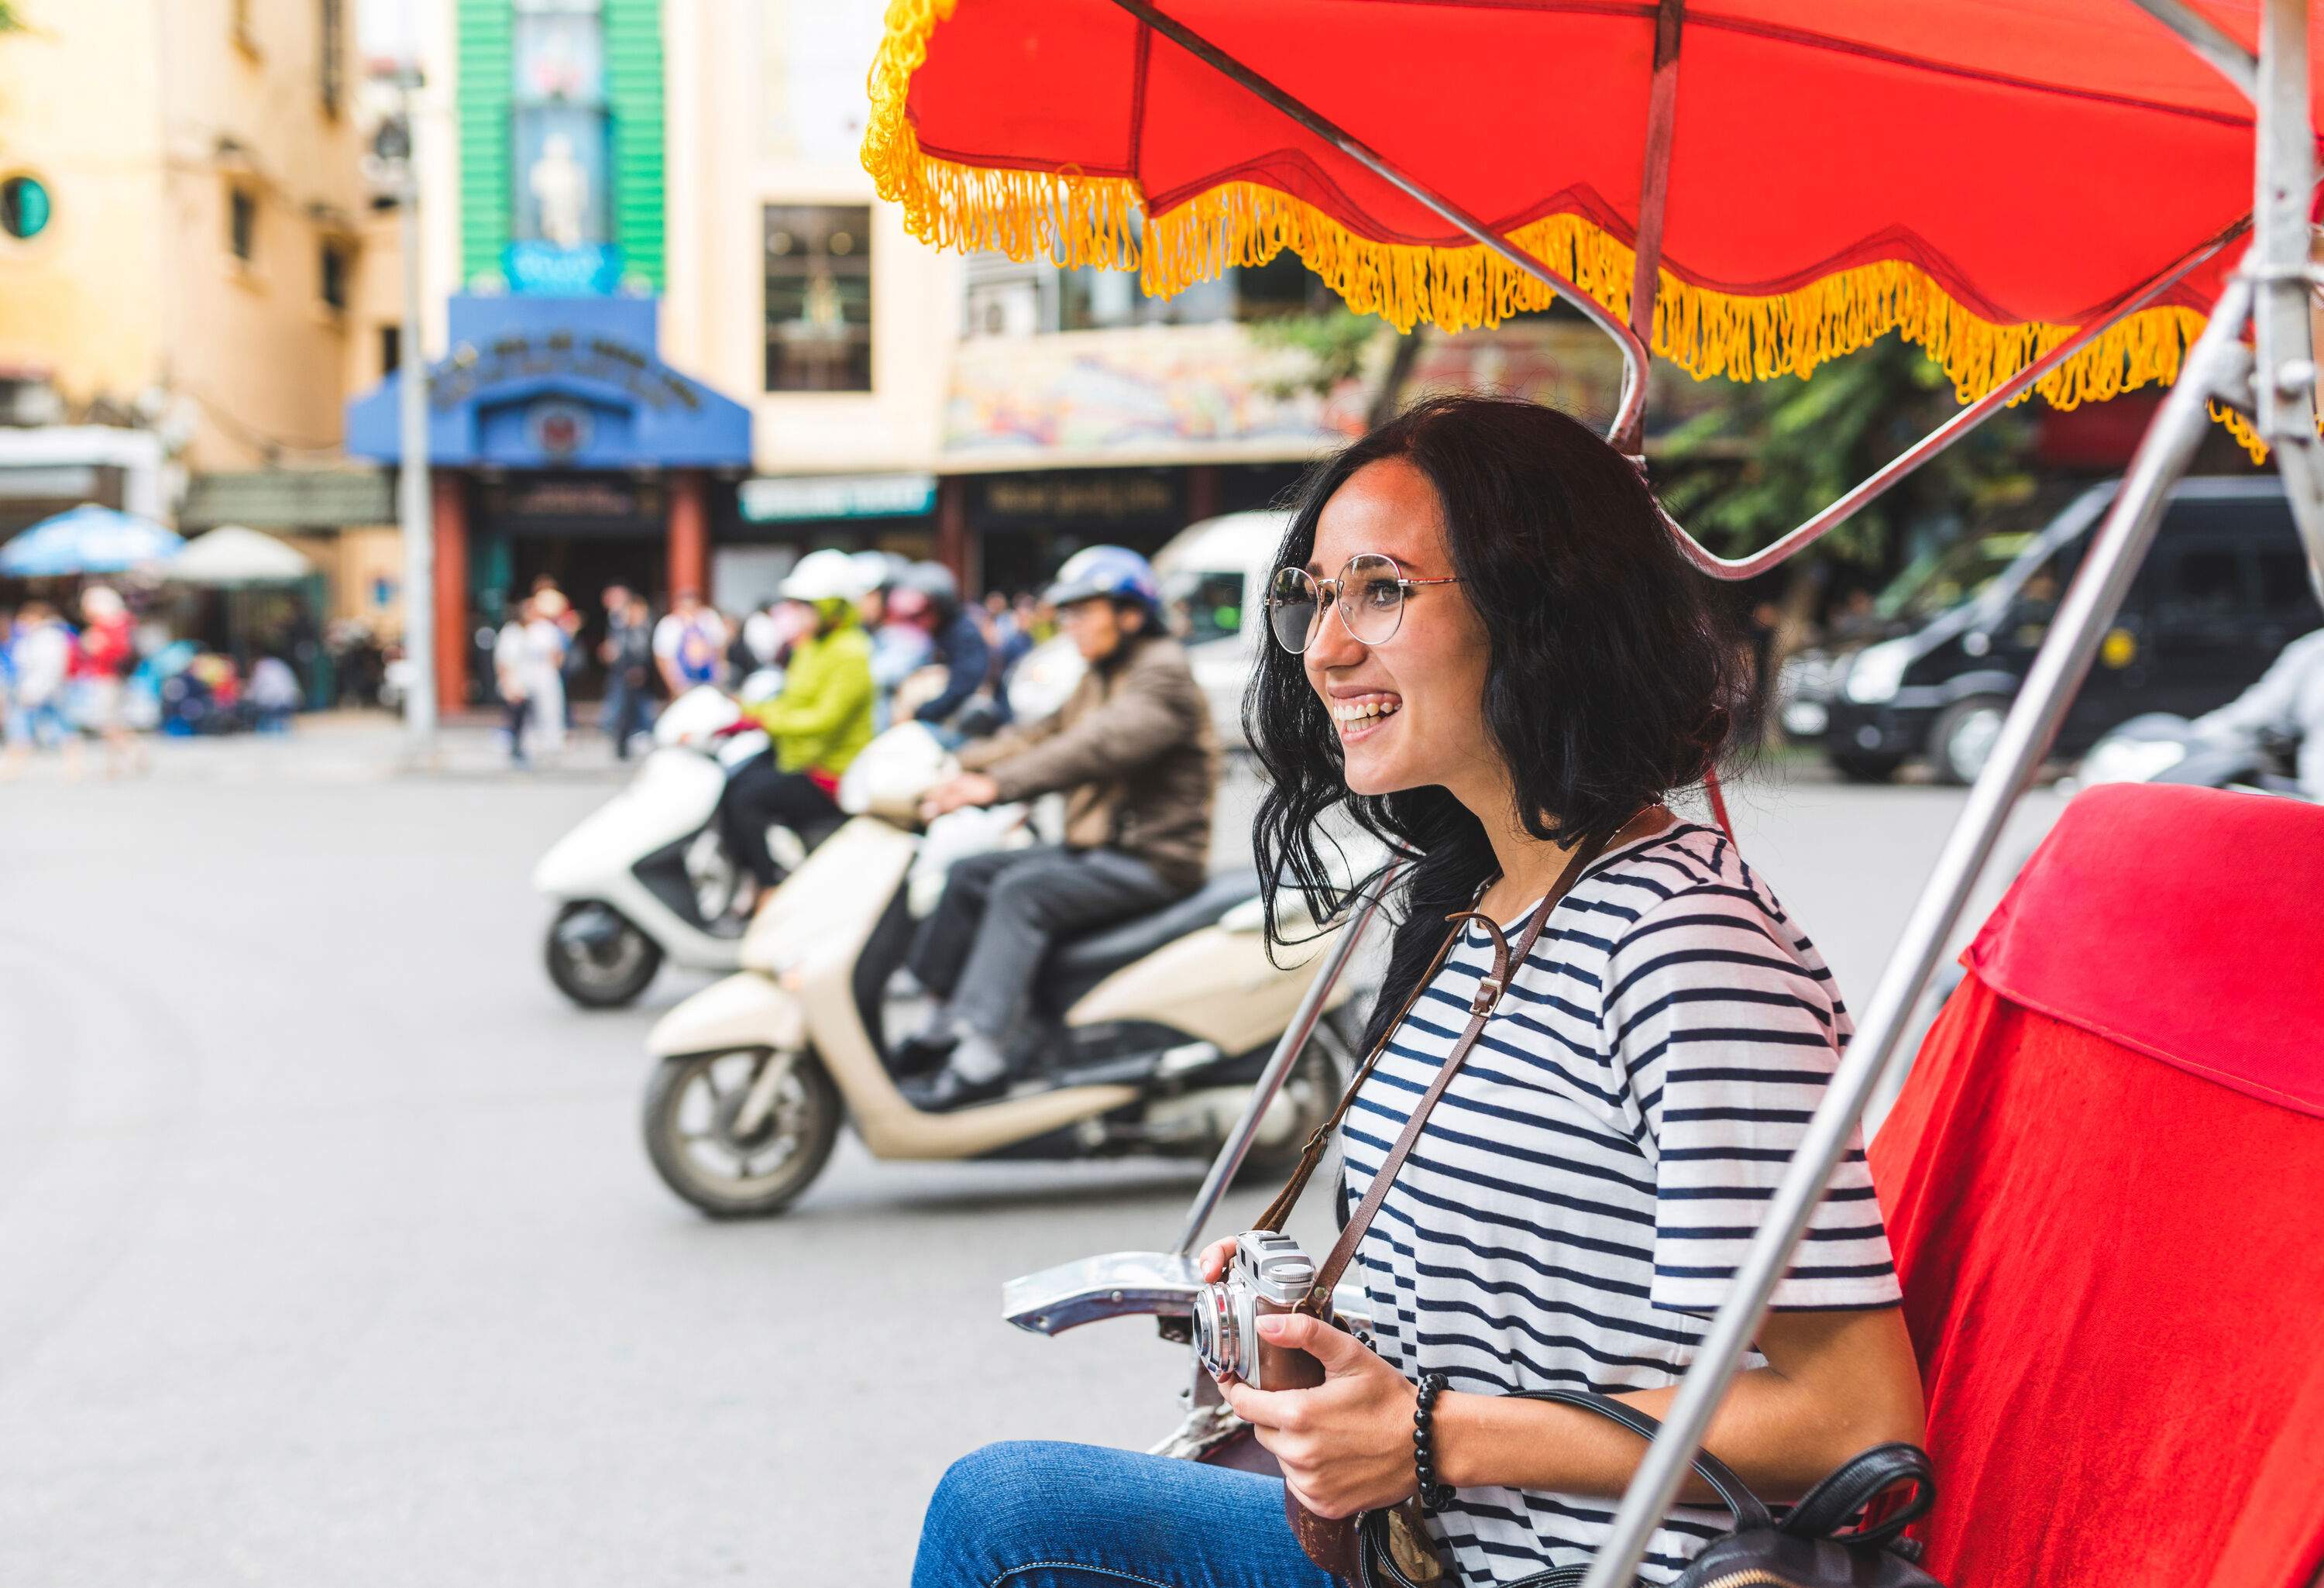 A woman in casual clothes smiles as she rides a rickshaw while holding a camera.